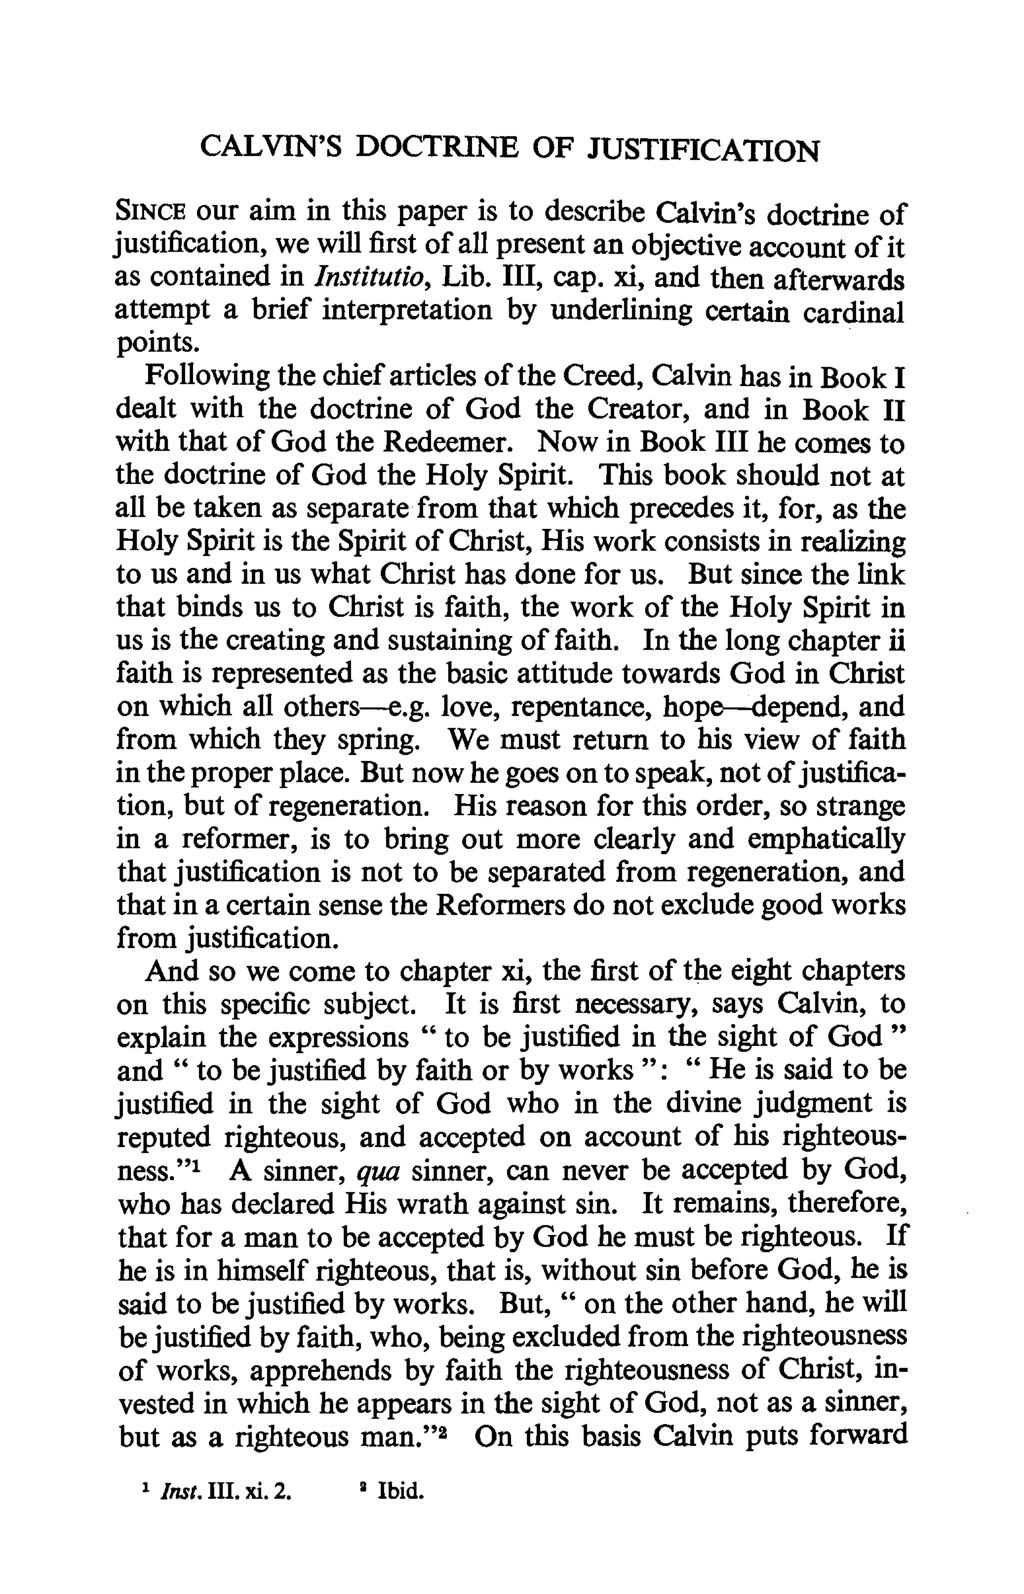 CALVIN'S DOCTRINE OF JUSTIFICATION SINCE our aim in this paper is to describe Calvin's doctrine of justification, we will first of all present an objective account of it as contained in lnstitutio,